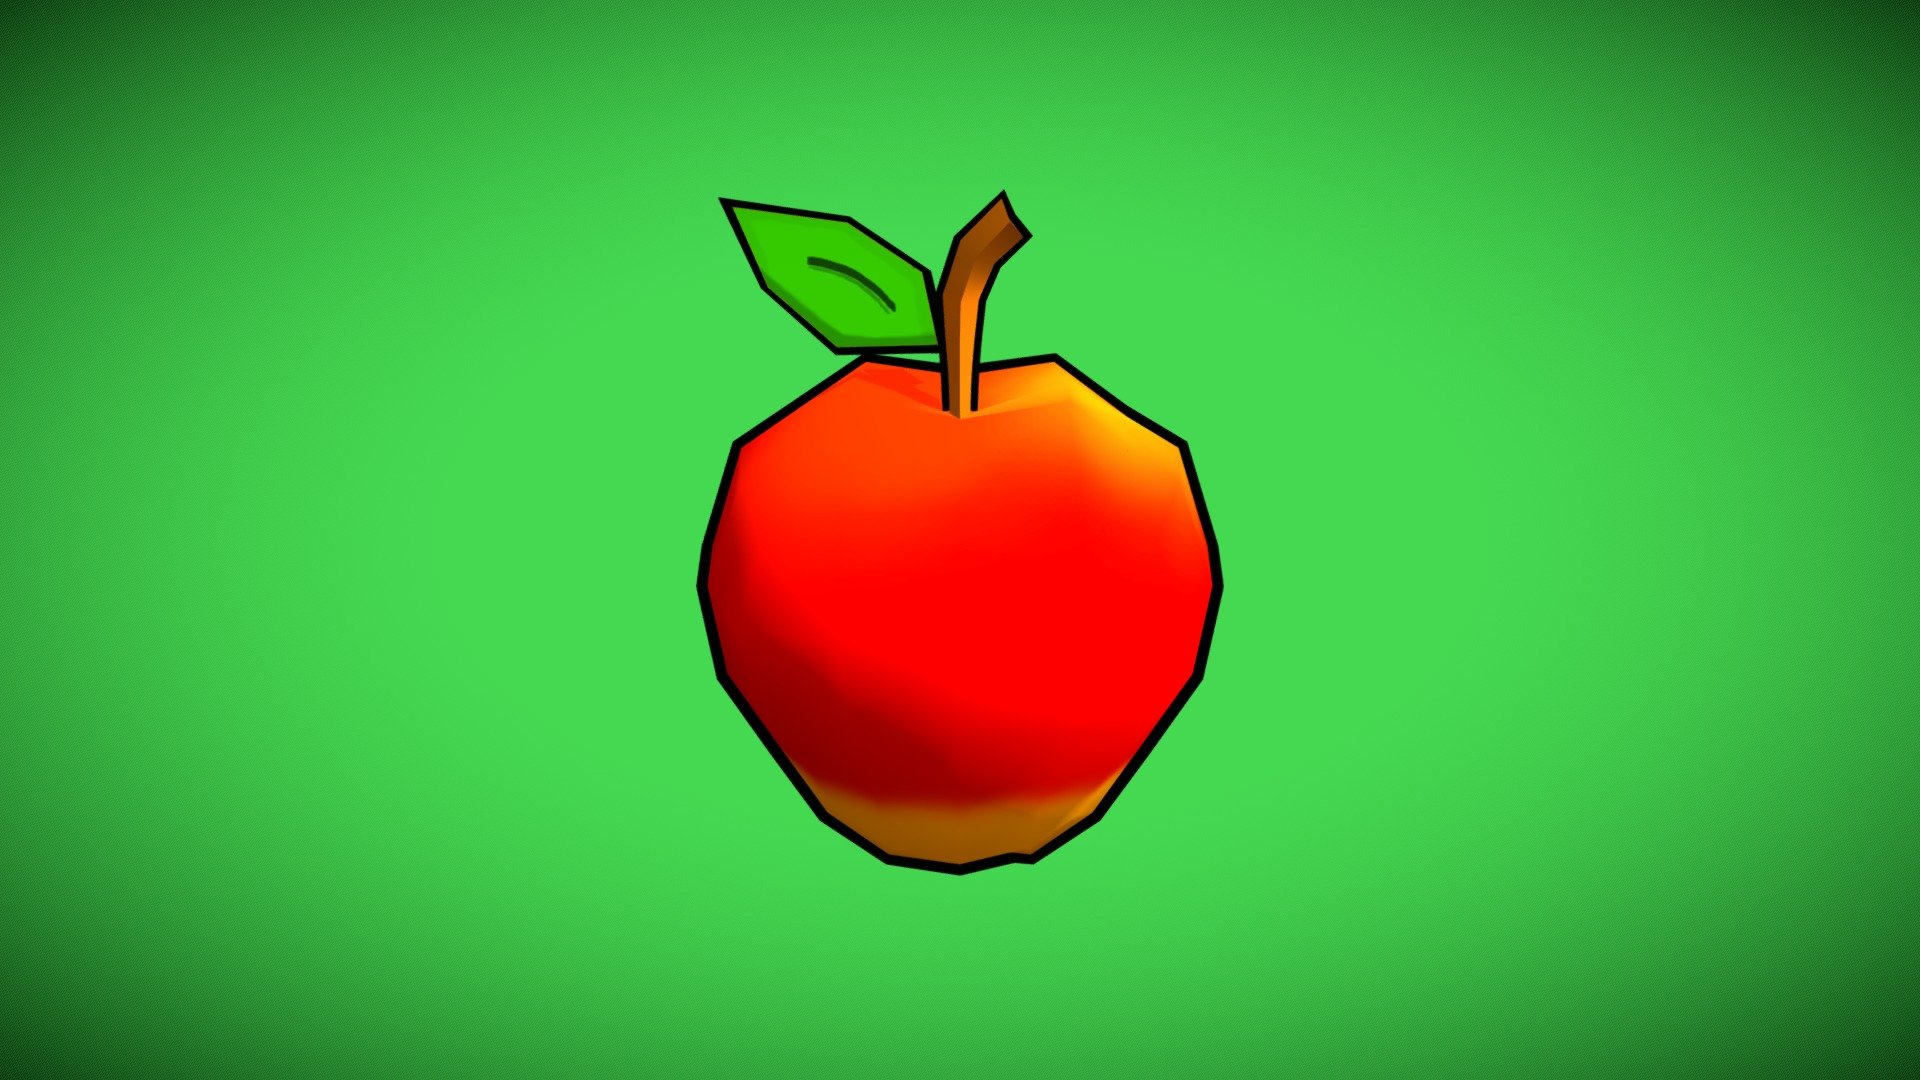 An apple with cartoon outlines and hand painted textures.

Software: Maya and 3D Coat 3d model